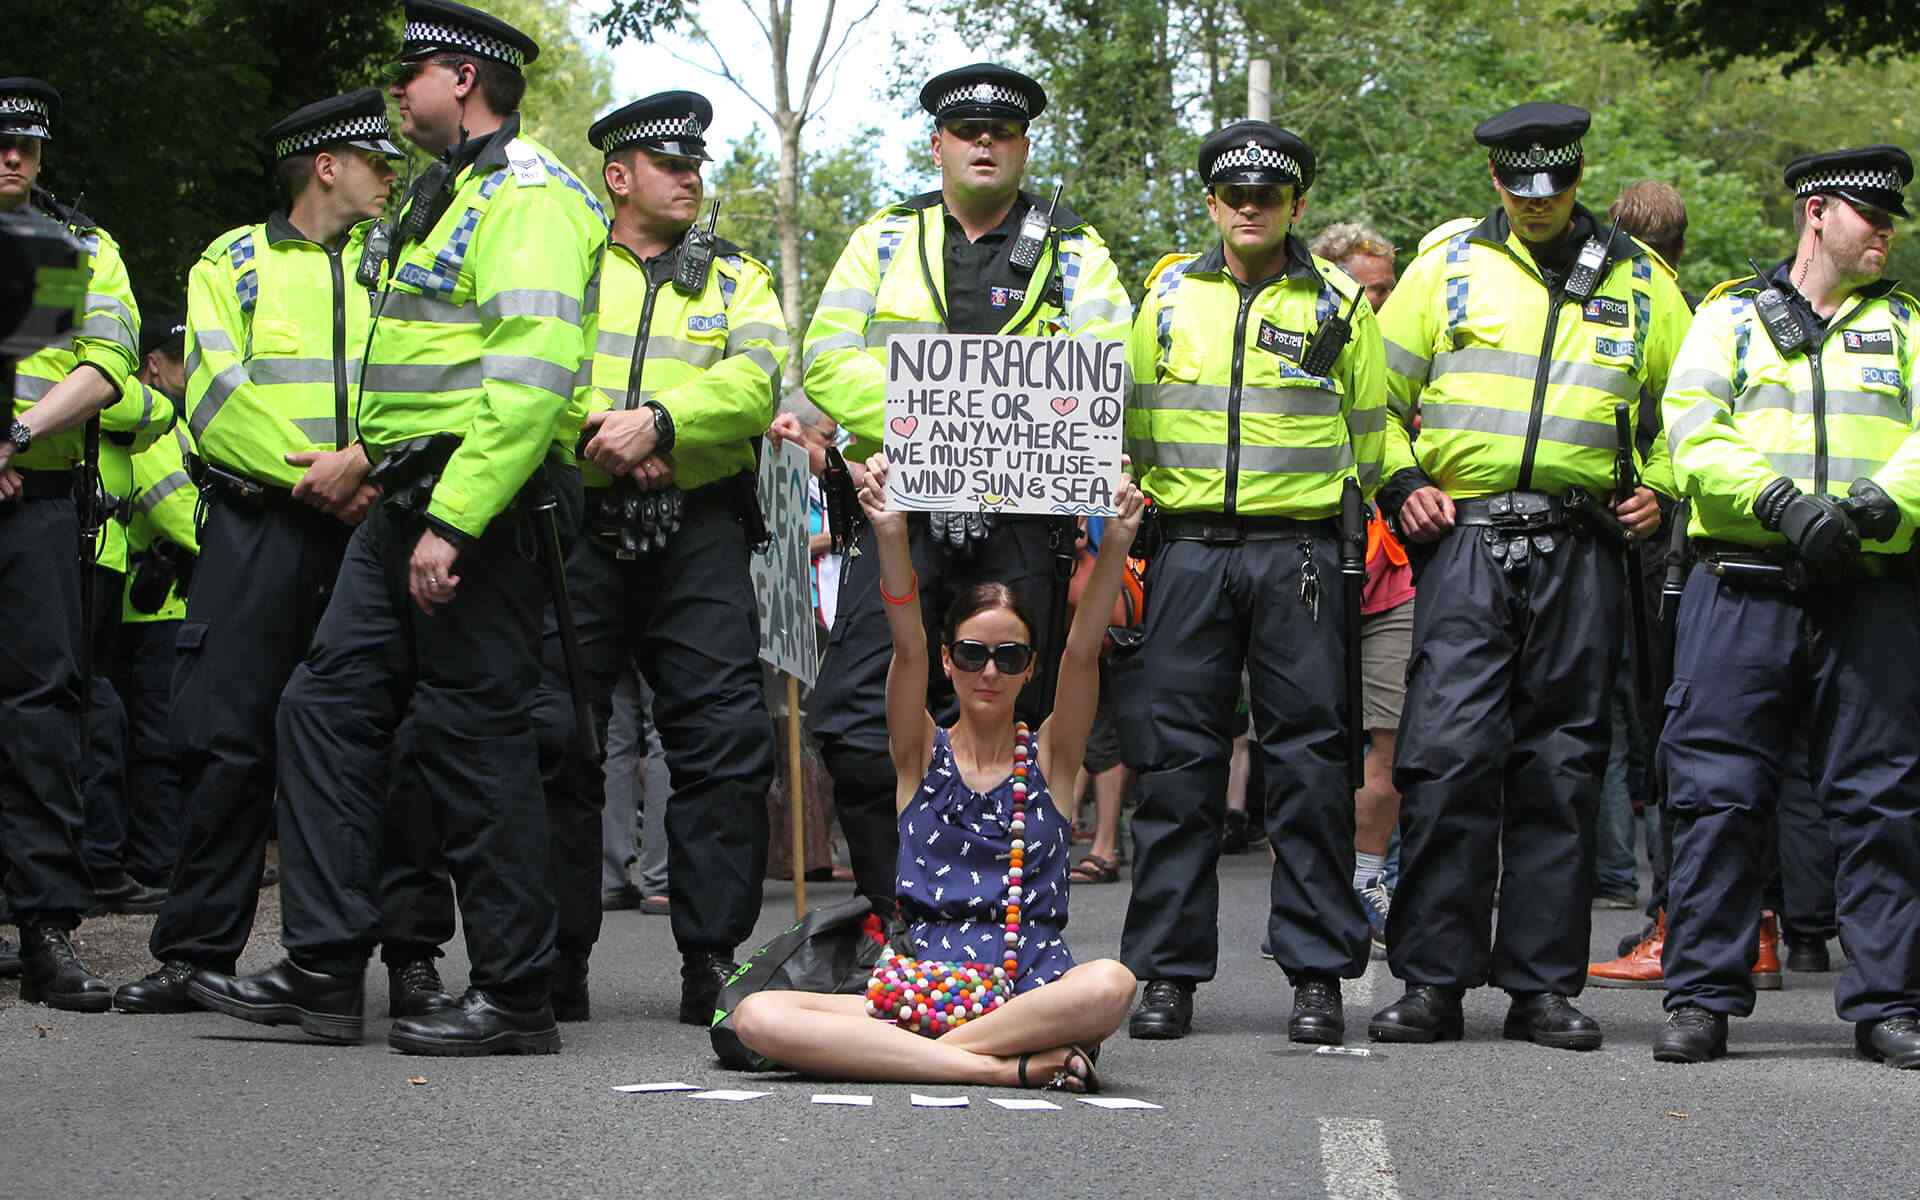 https://realclimatesolution.com/wp-content/uploads/2019/03/woman_protest.jpg